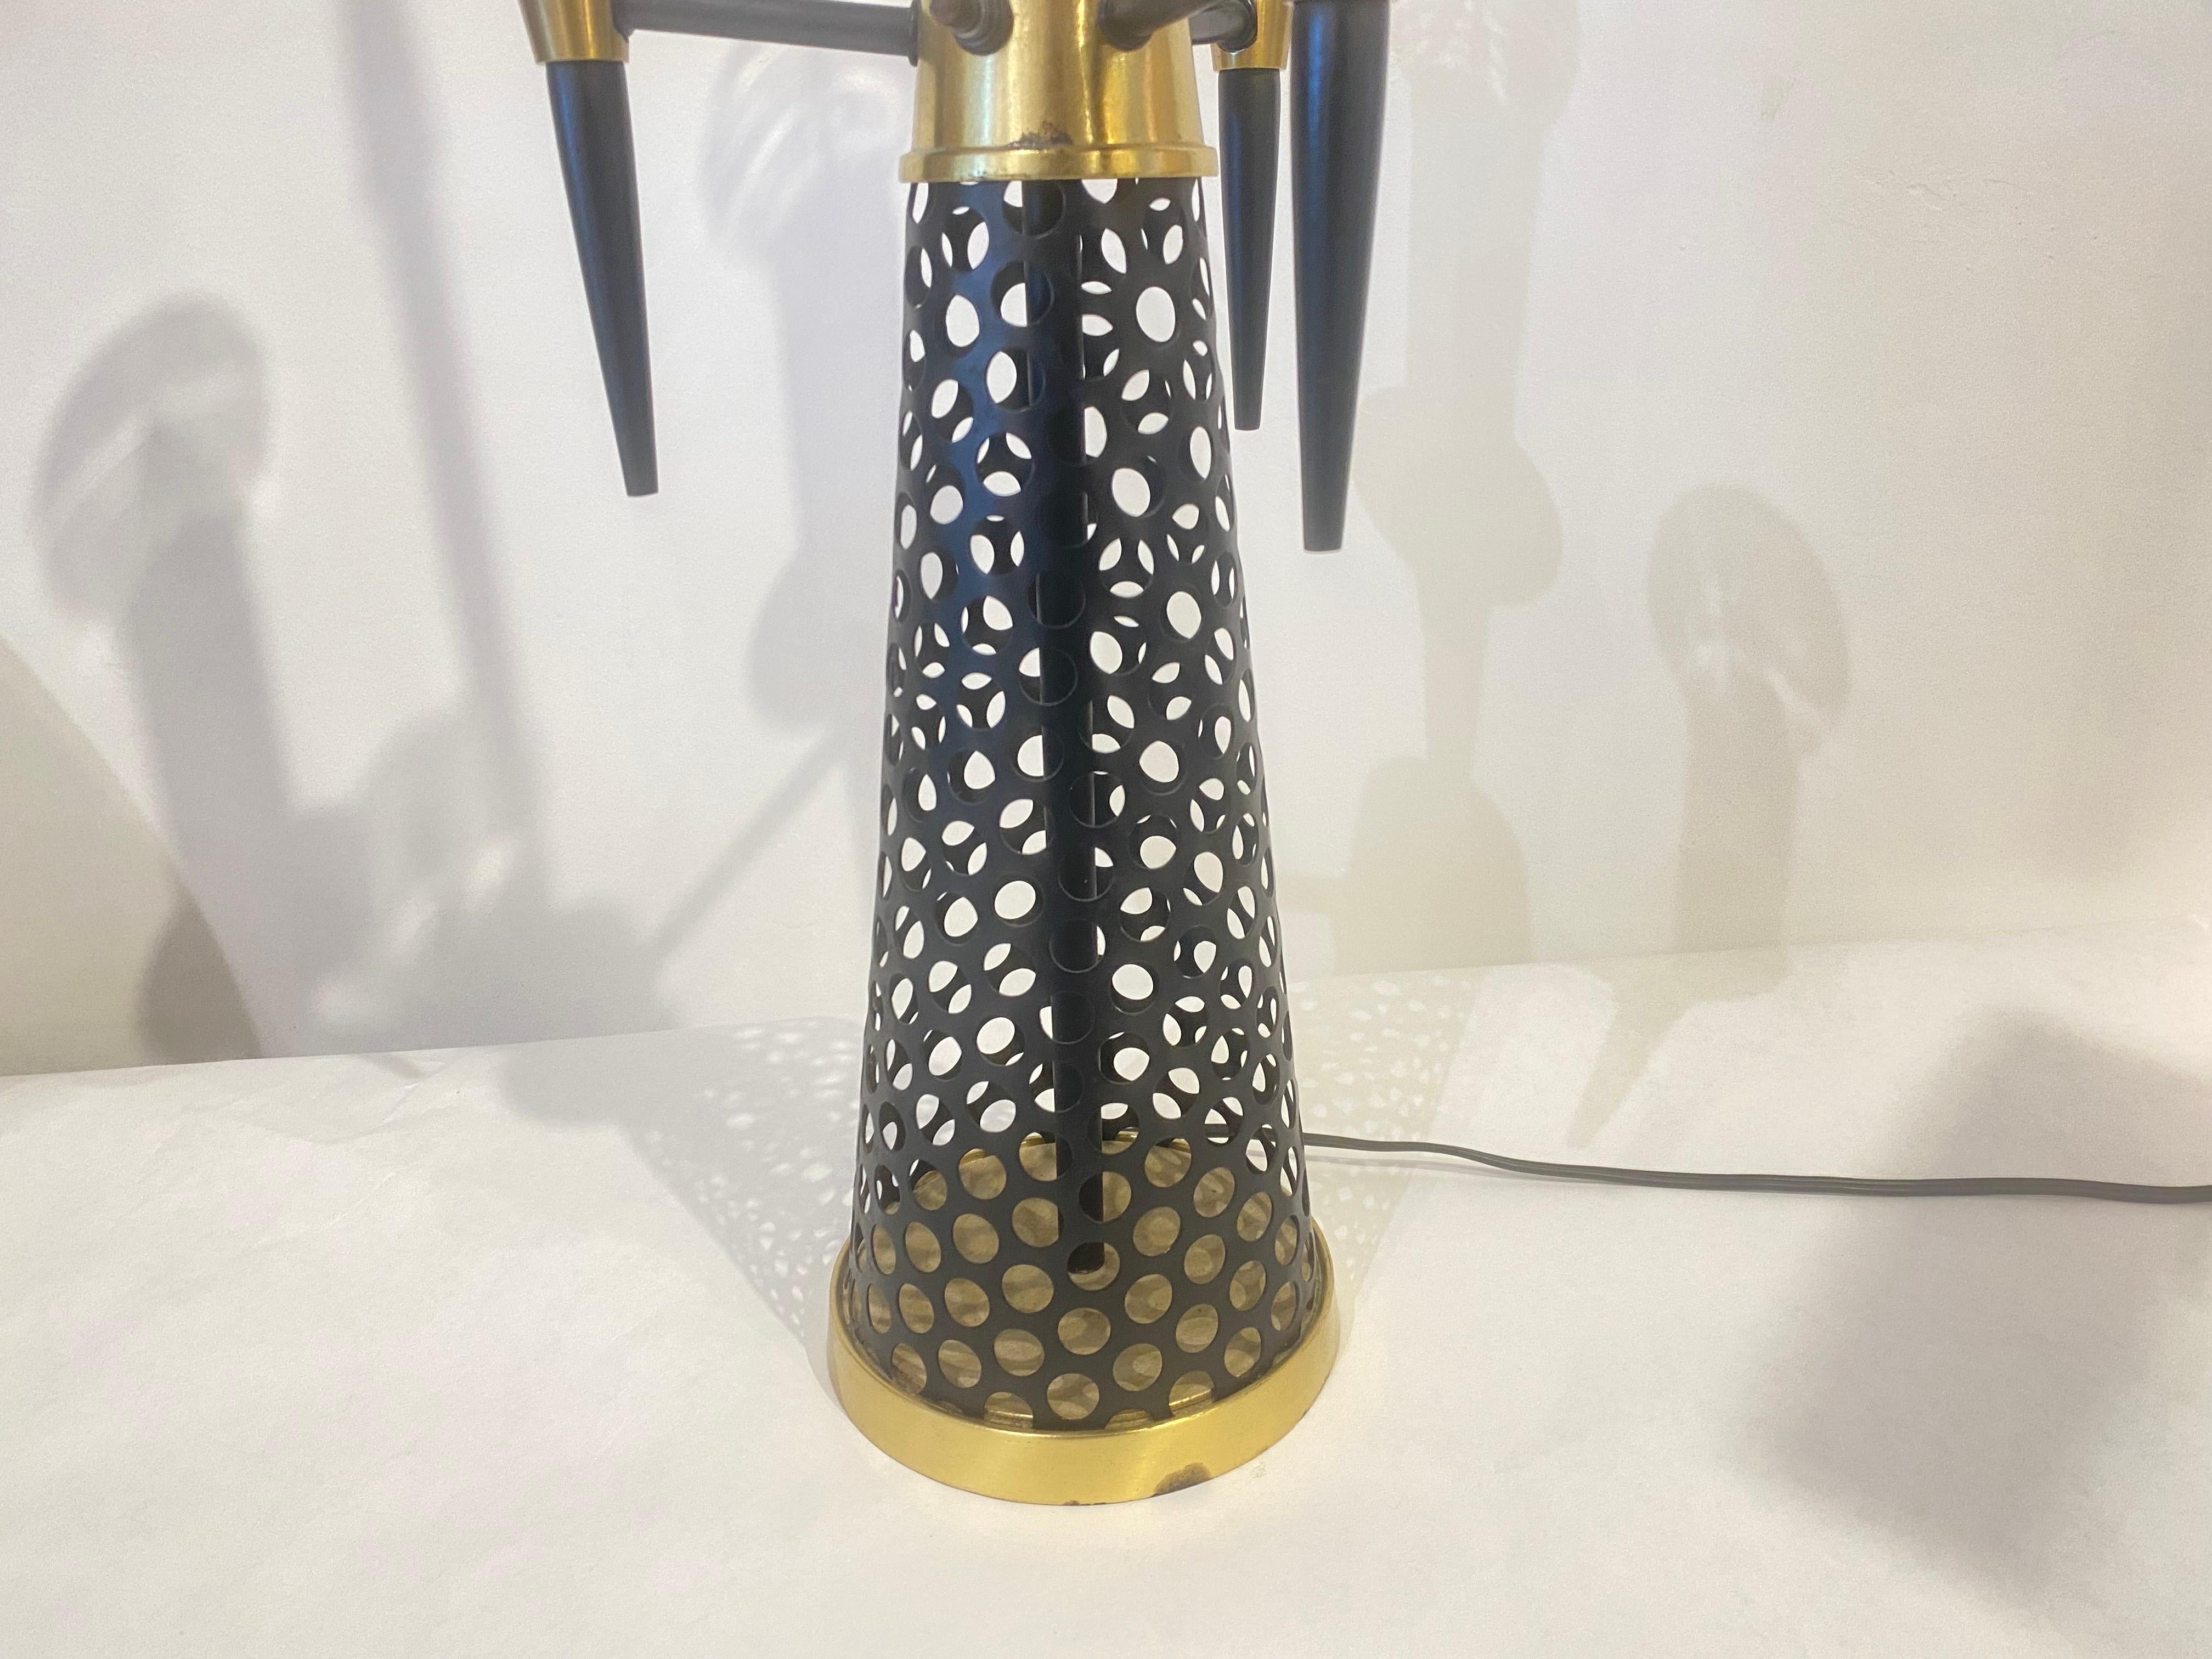 1960s Perforated Metal & Brass Table Lamp In Good Condition For Sale In East Hampton, NY